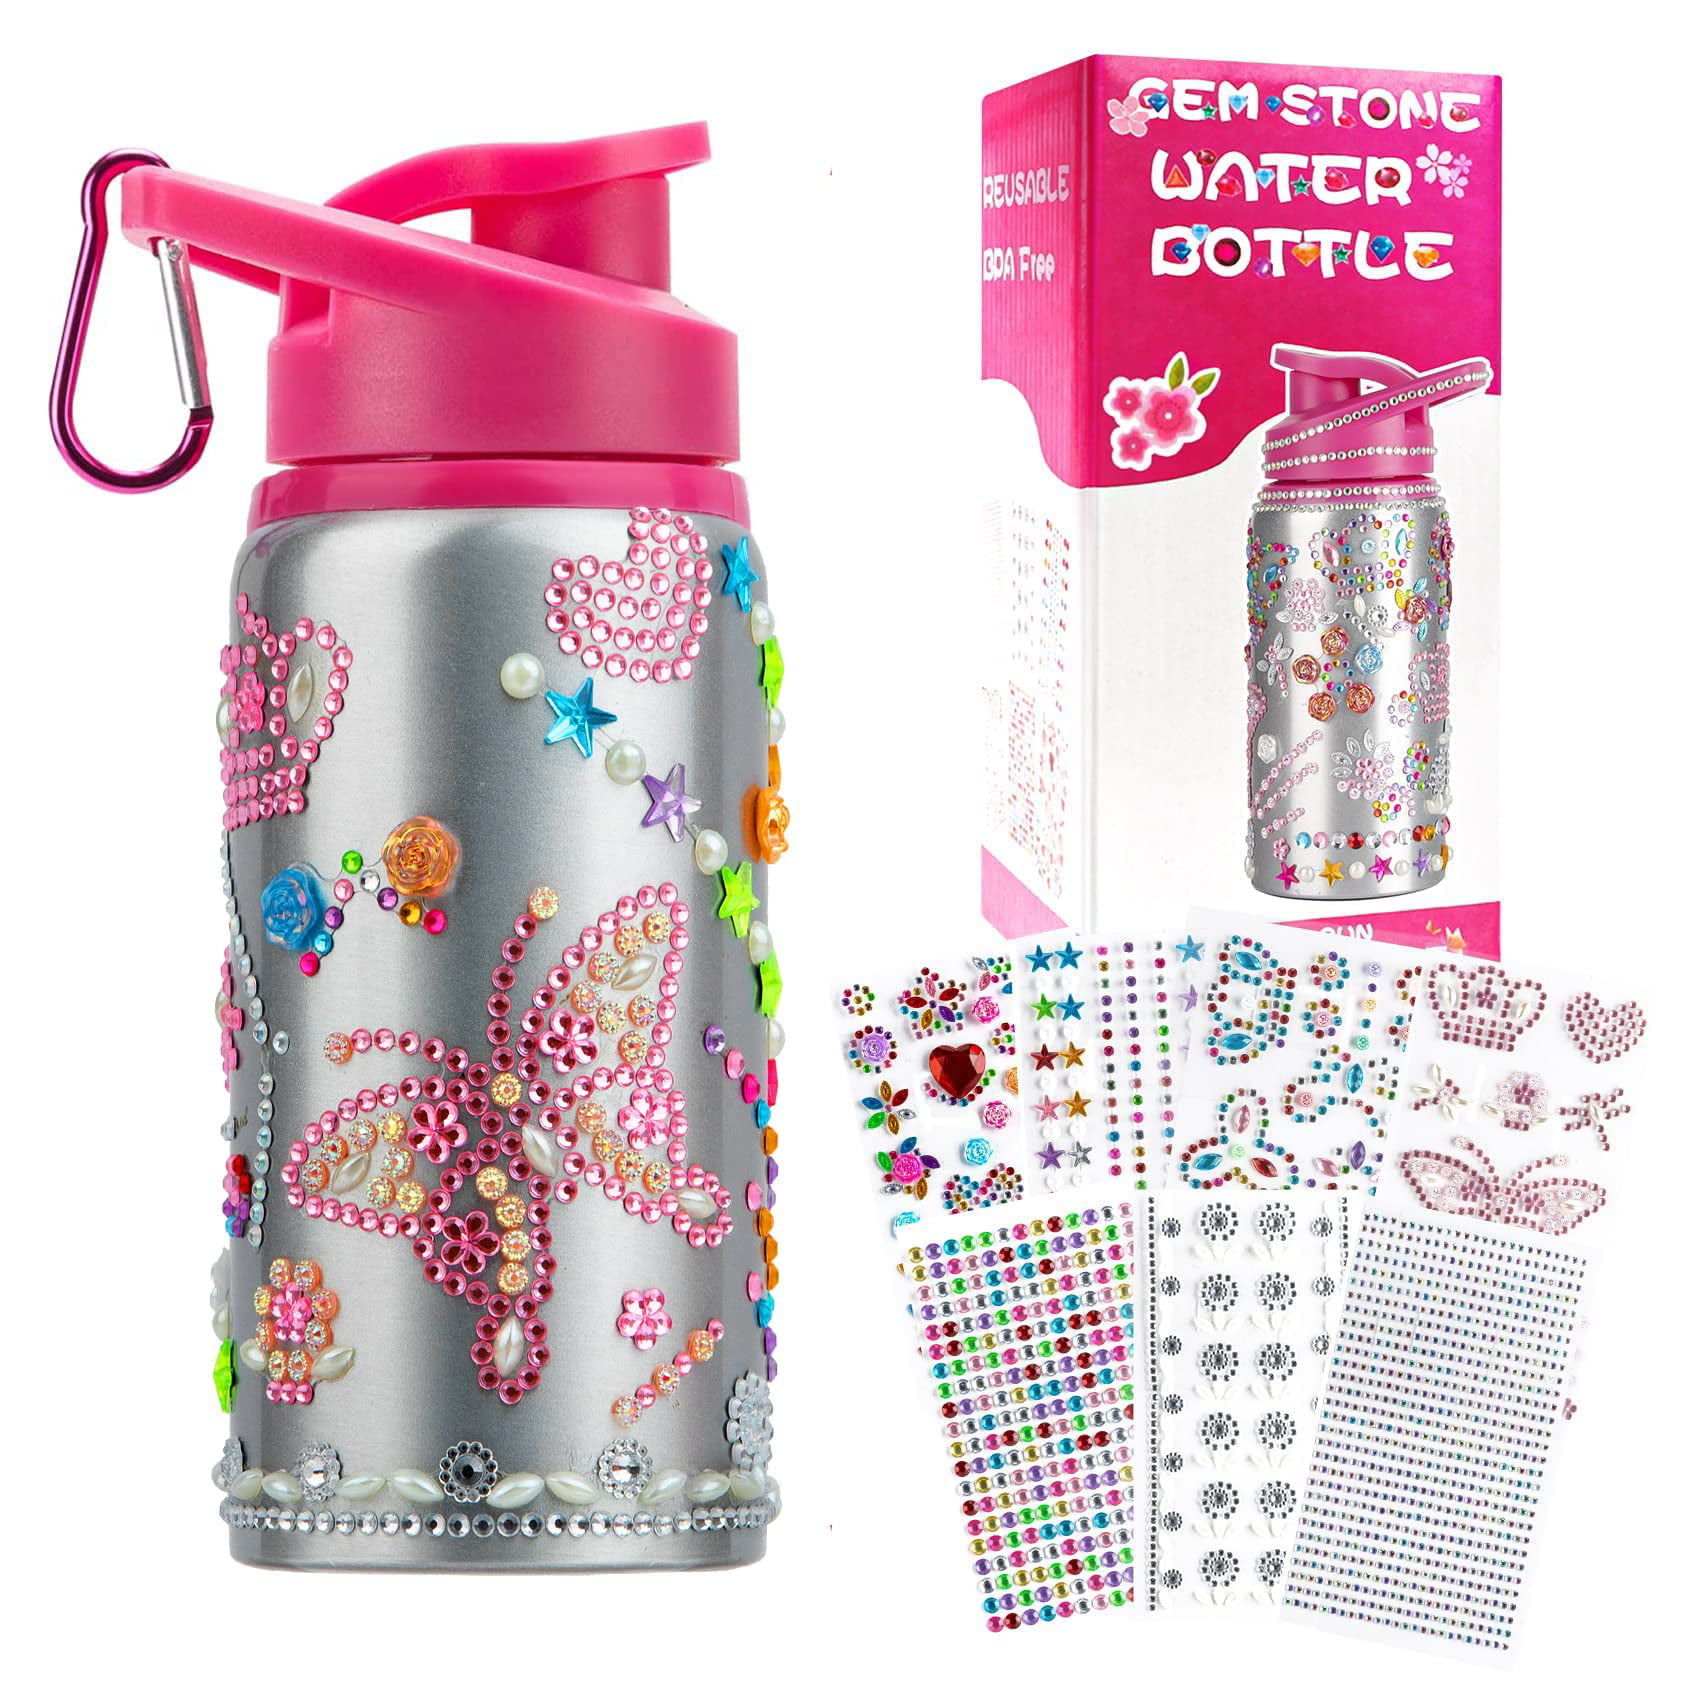 YOFUN Decorate Your Own Water Bottle with 11 Sheets of Unicorn Stickers & Glitter Gems, Craft Kit & Art Kit for Children, Gift for Girls Age 4 5 6 7